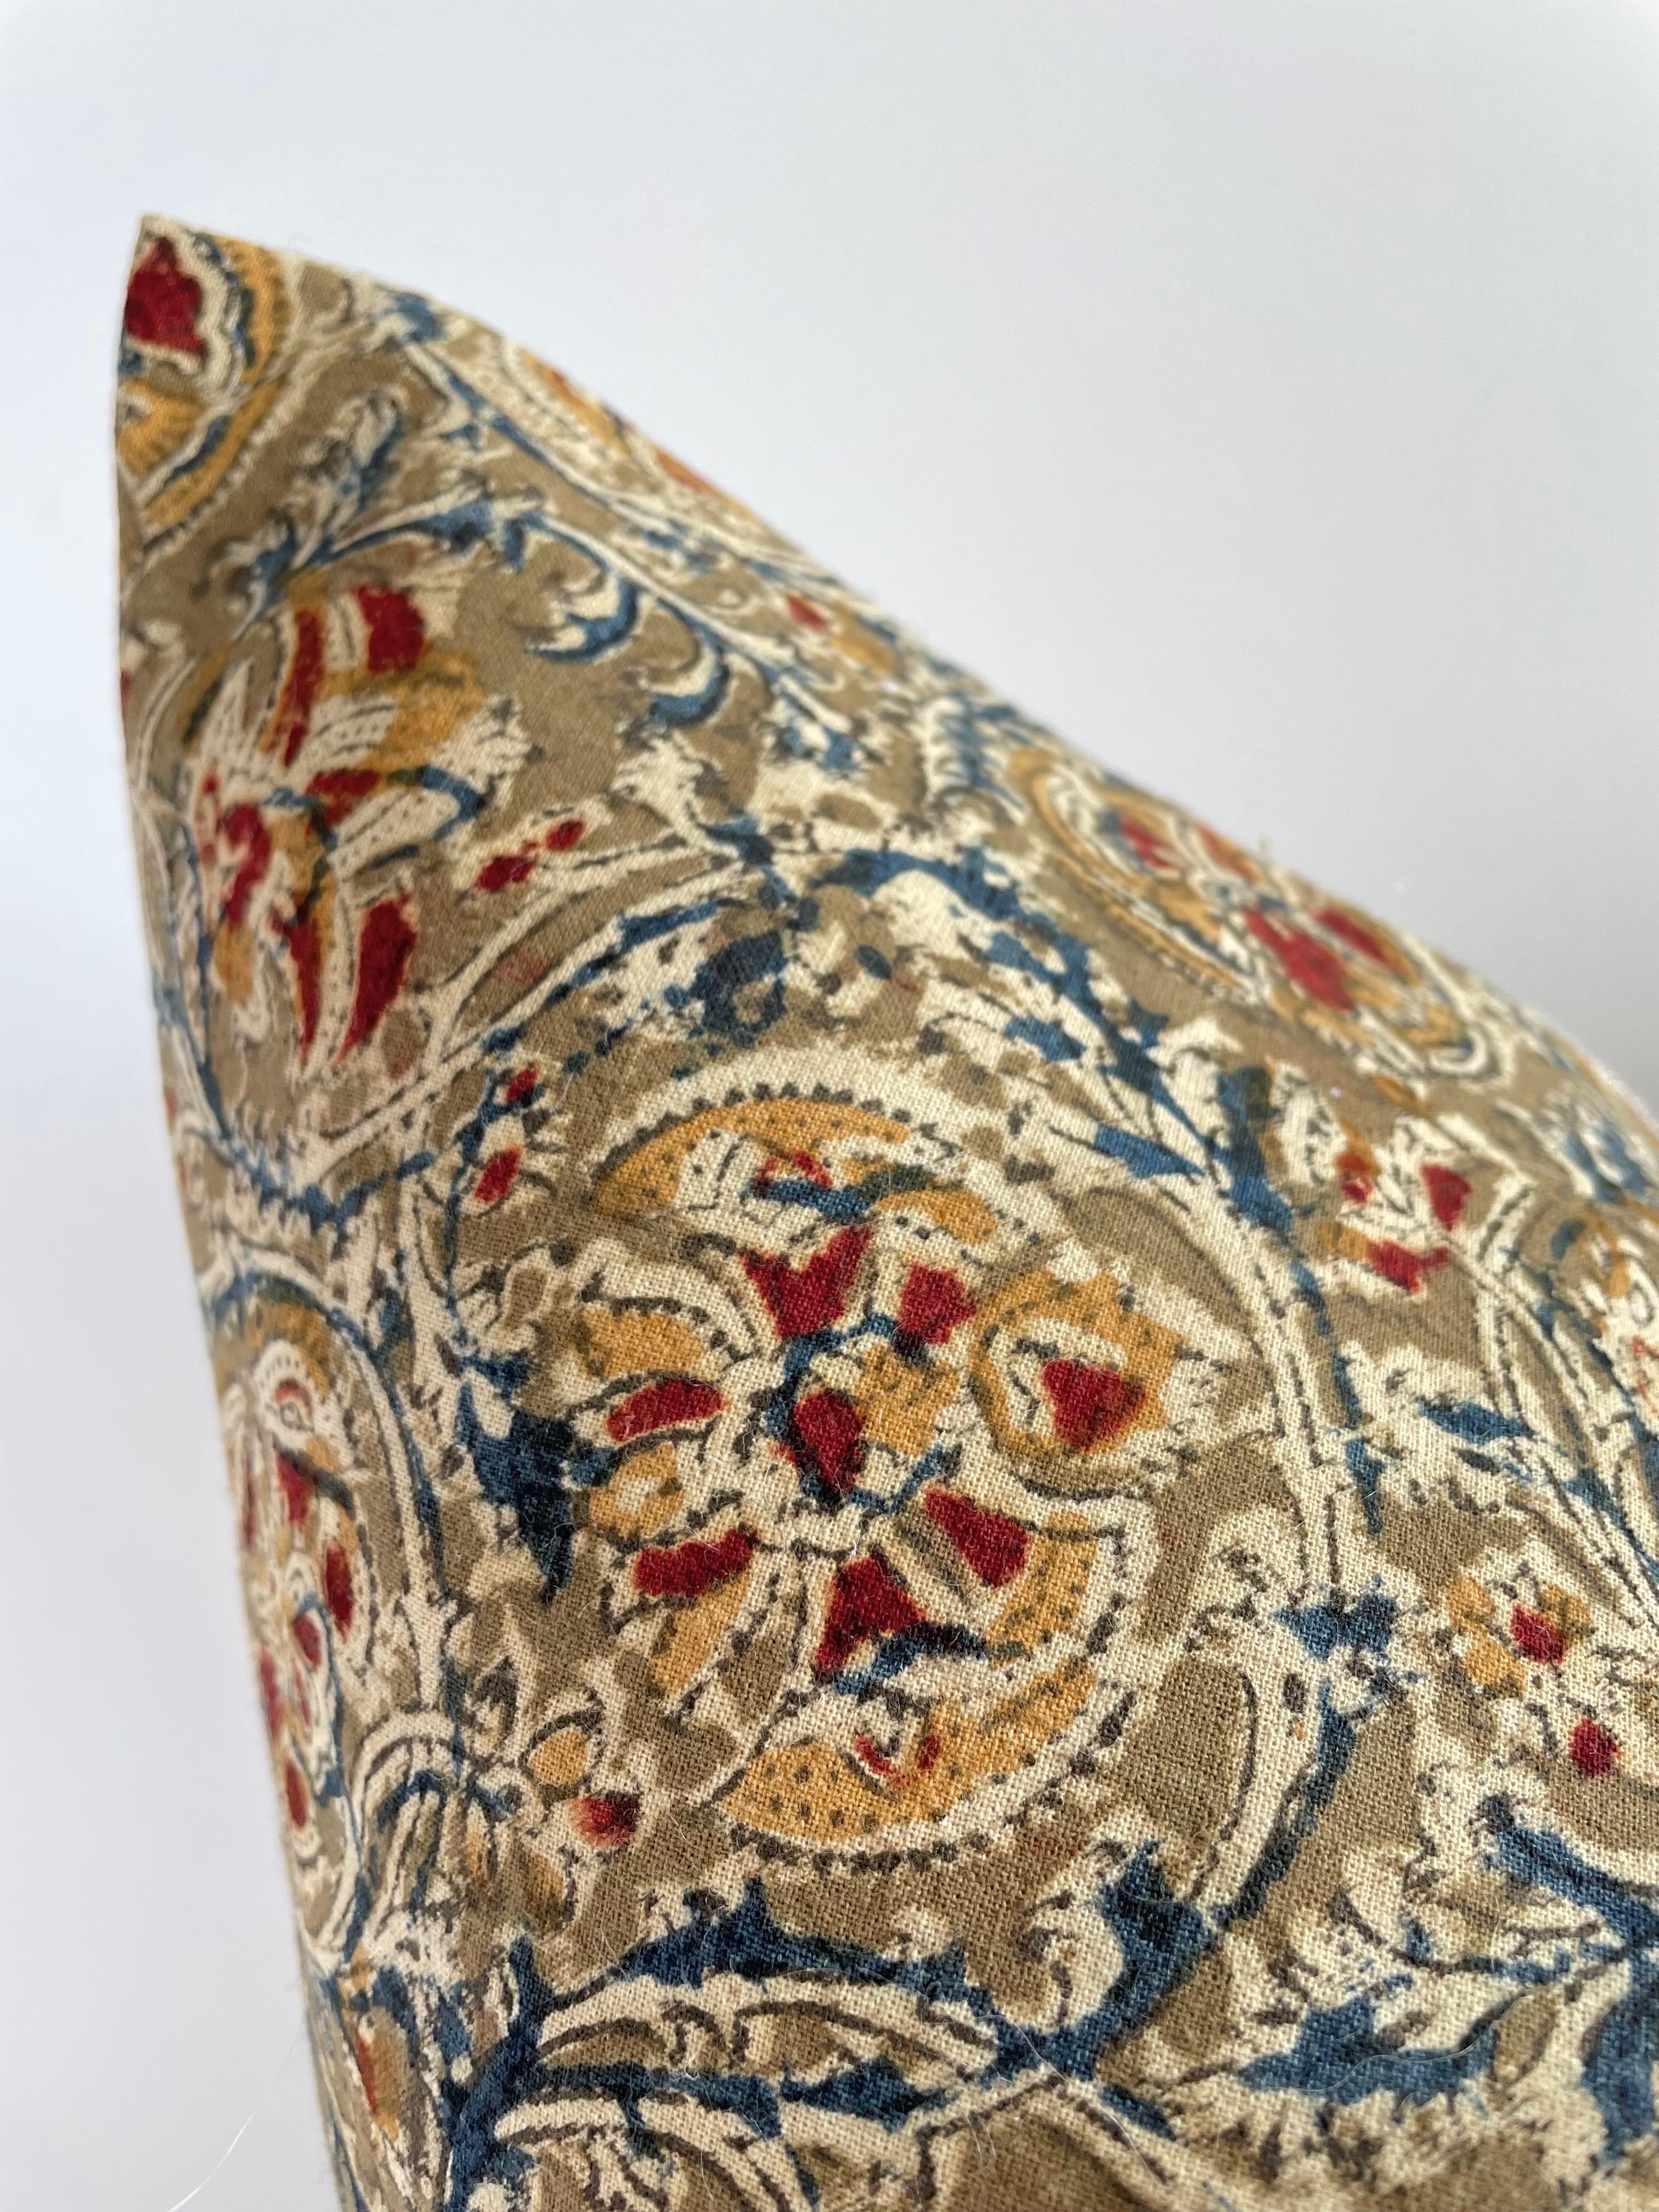 Beautifully hand block-printed pillow on cotton/ linen fabric. Featuring a floral pattern in the color olive. Linen back. 
Care Instructions: Dry clean recommended. Includes insert. 
Size: 22” x 22” 
Colors: Blue, gold, rust, flax, olive, khaki.